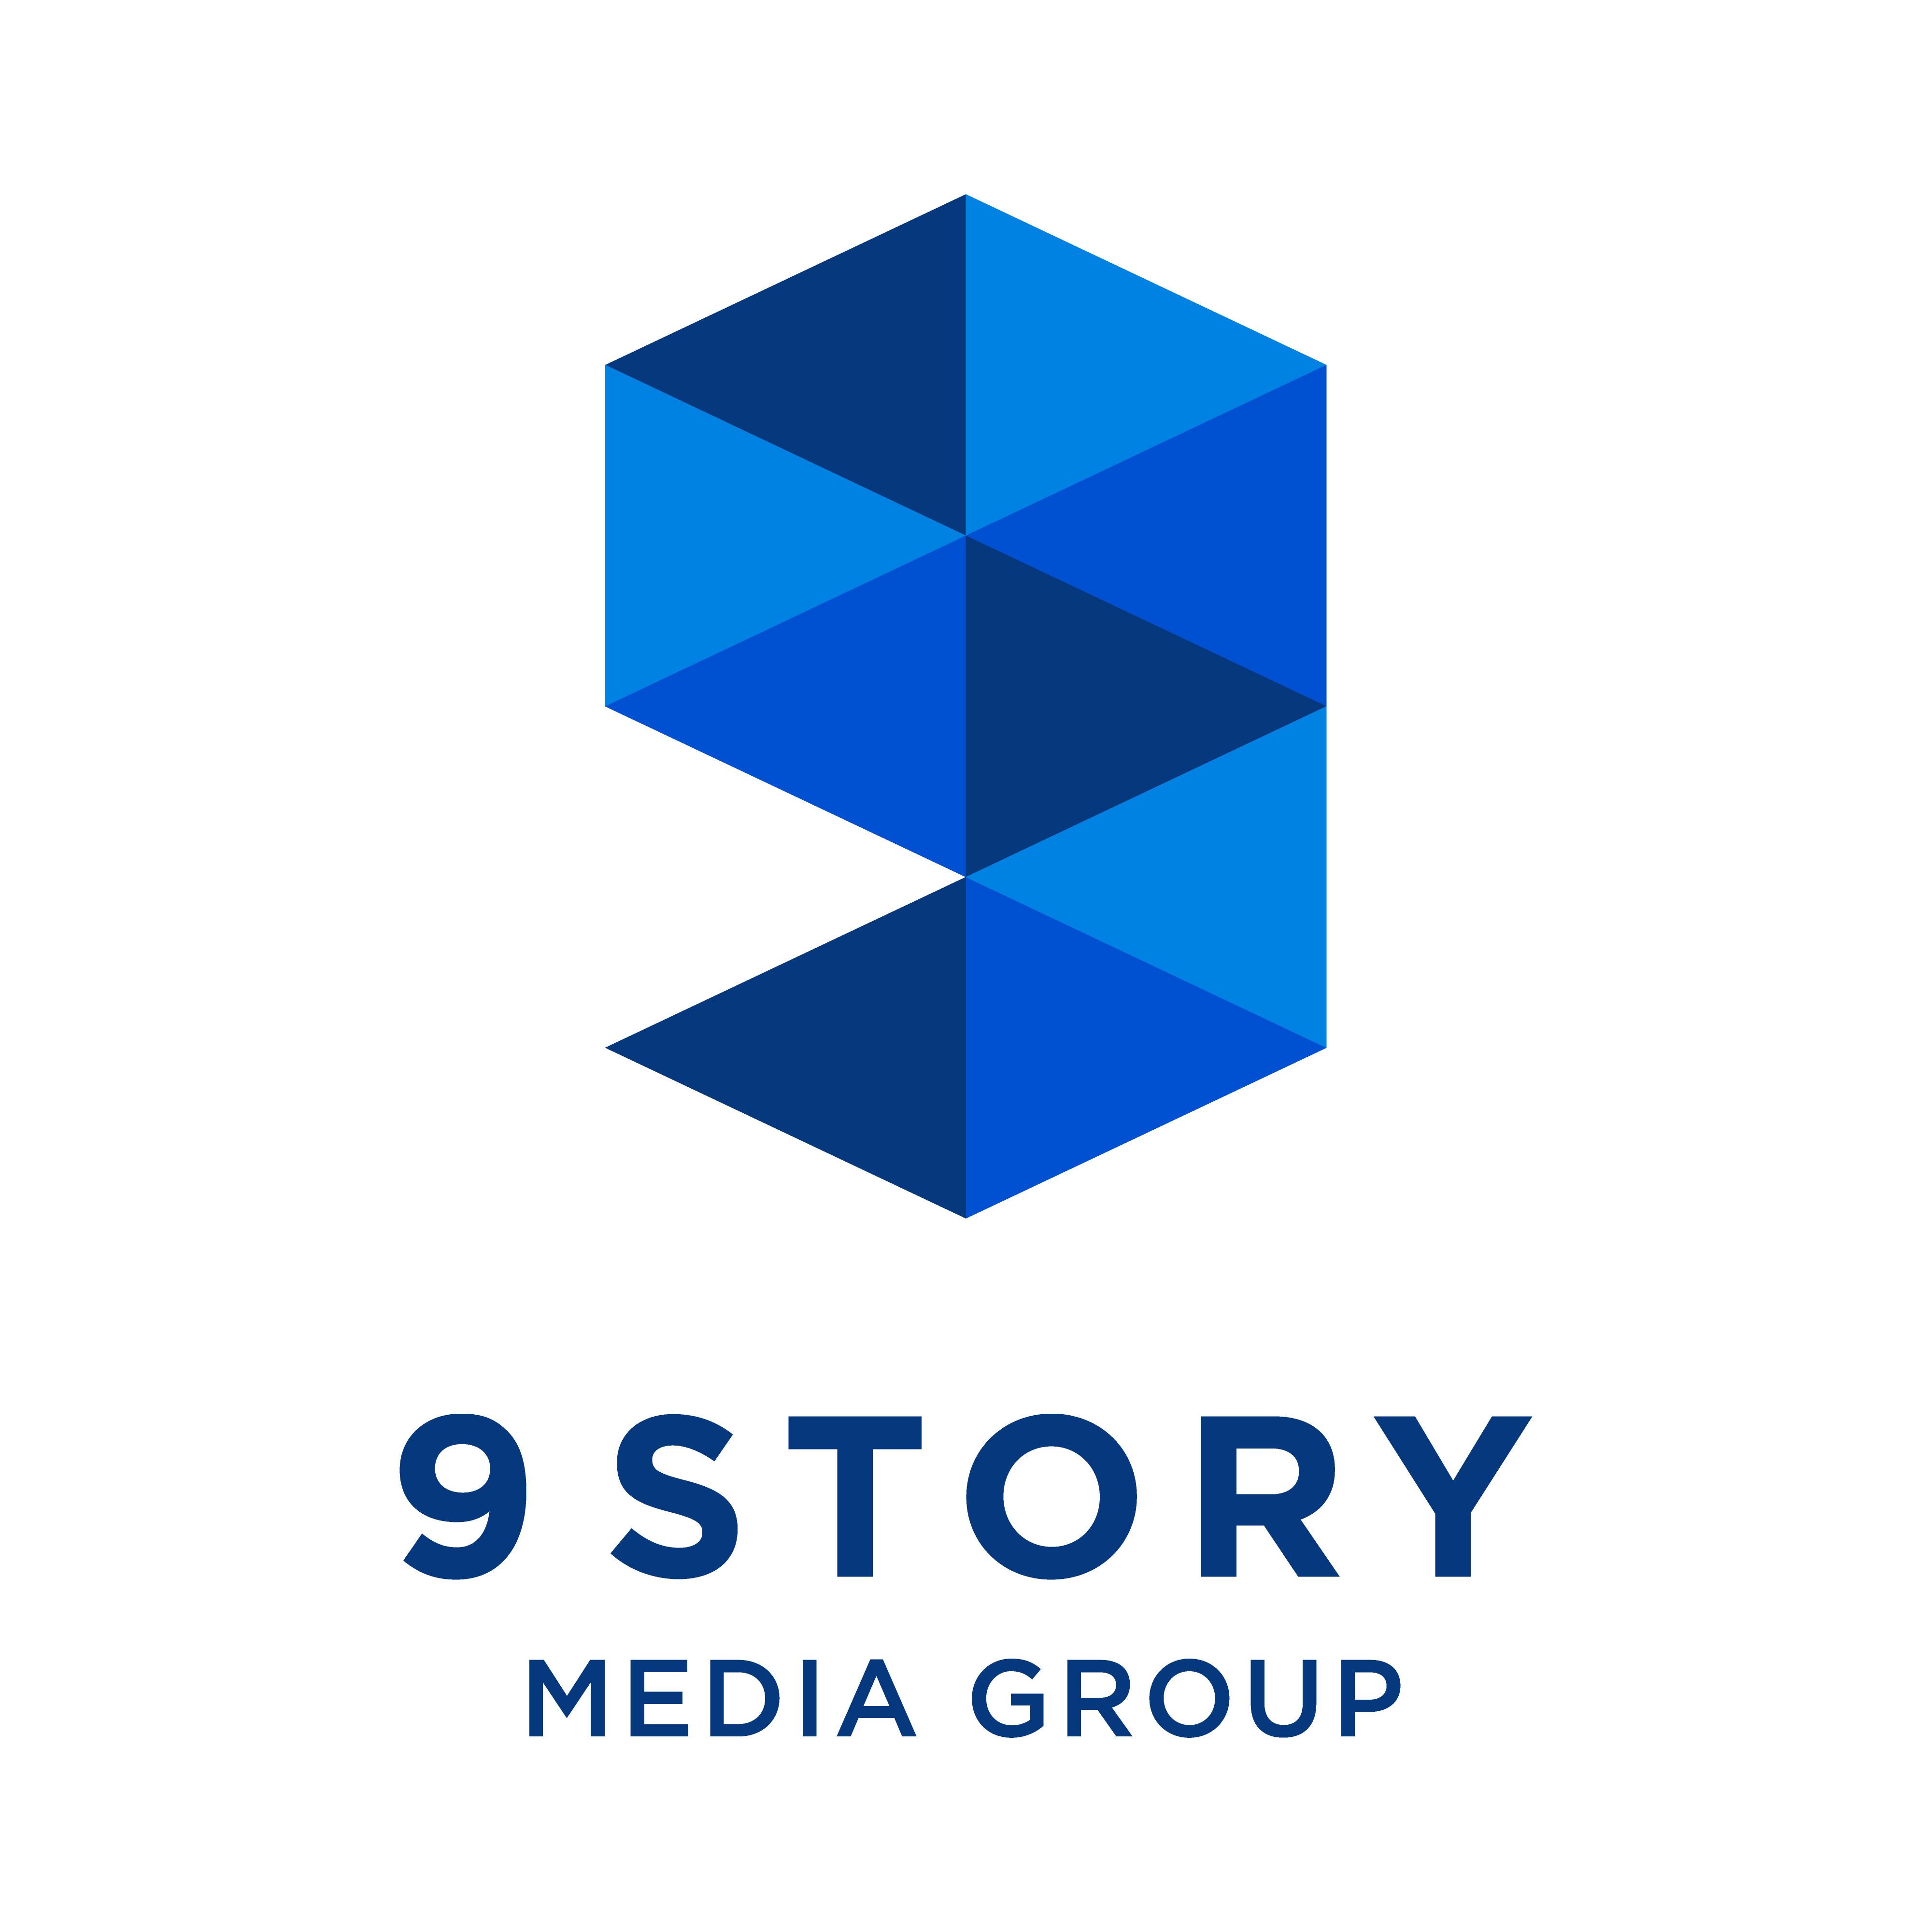 9 Story Media Group announces production of new animated children’s series